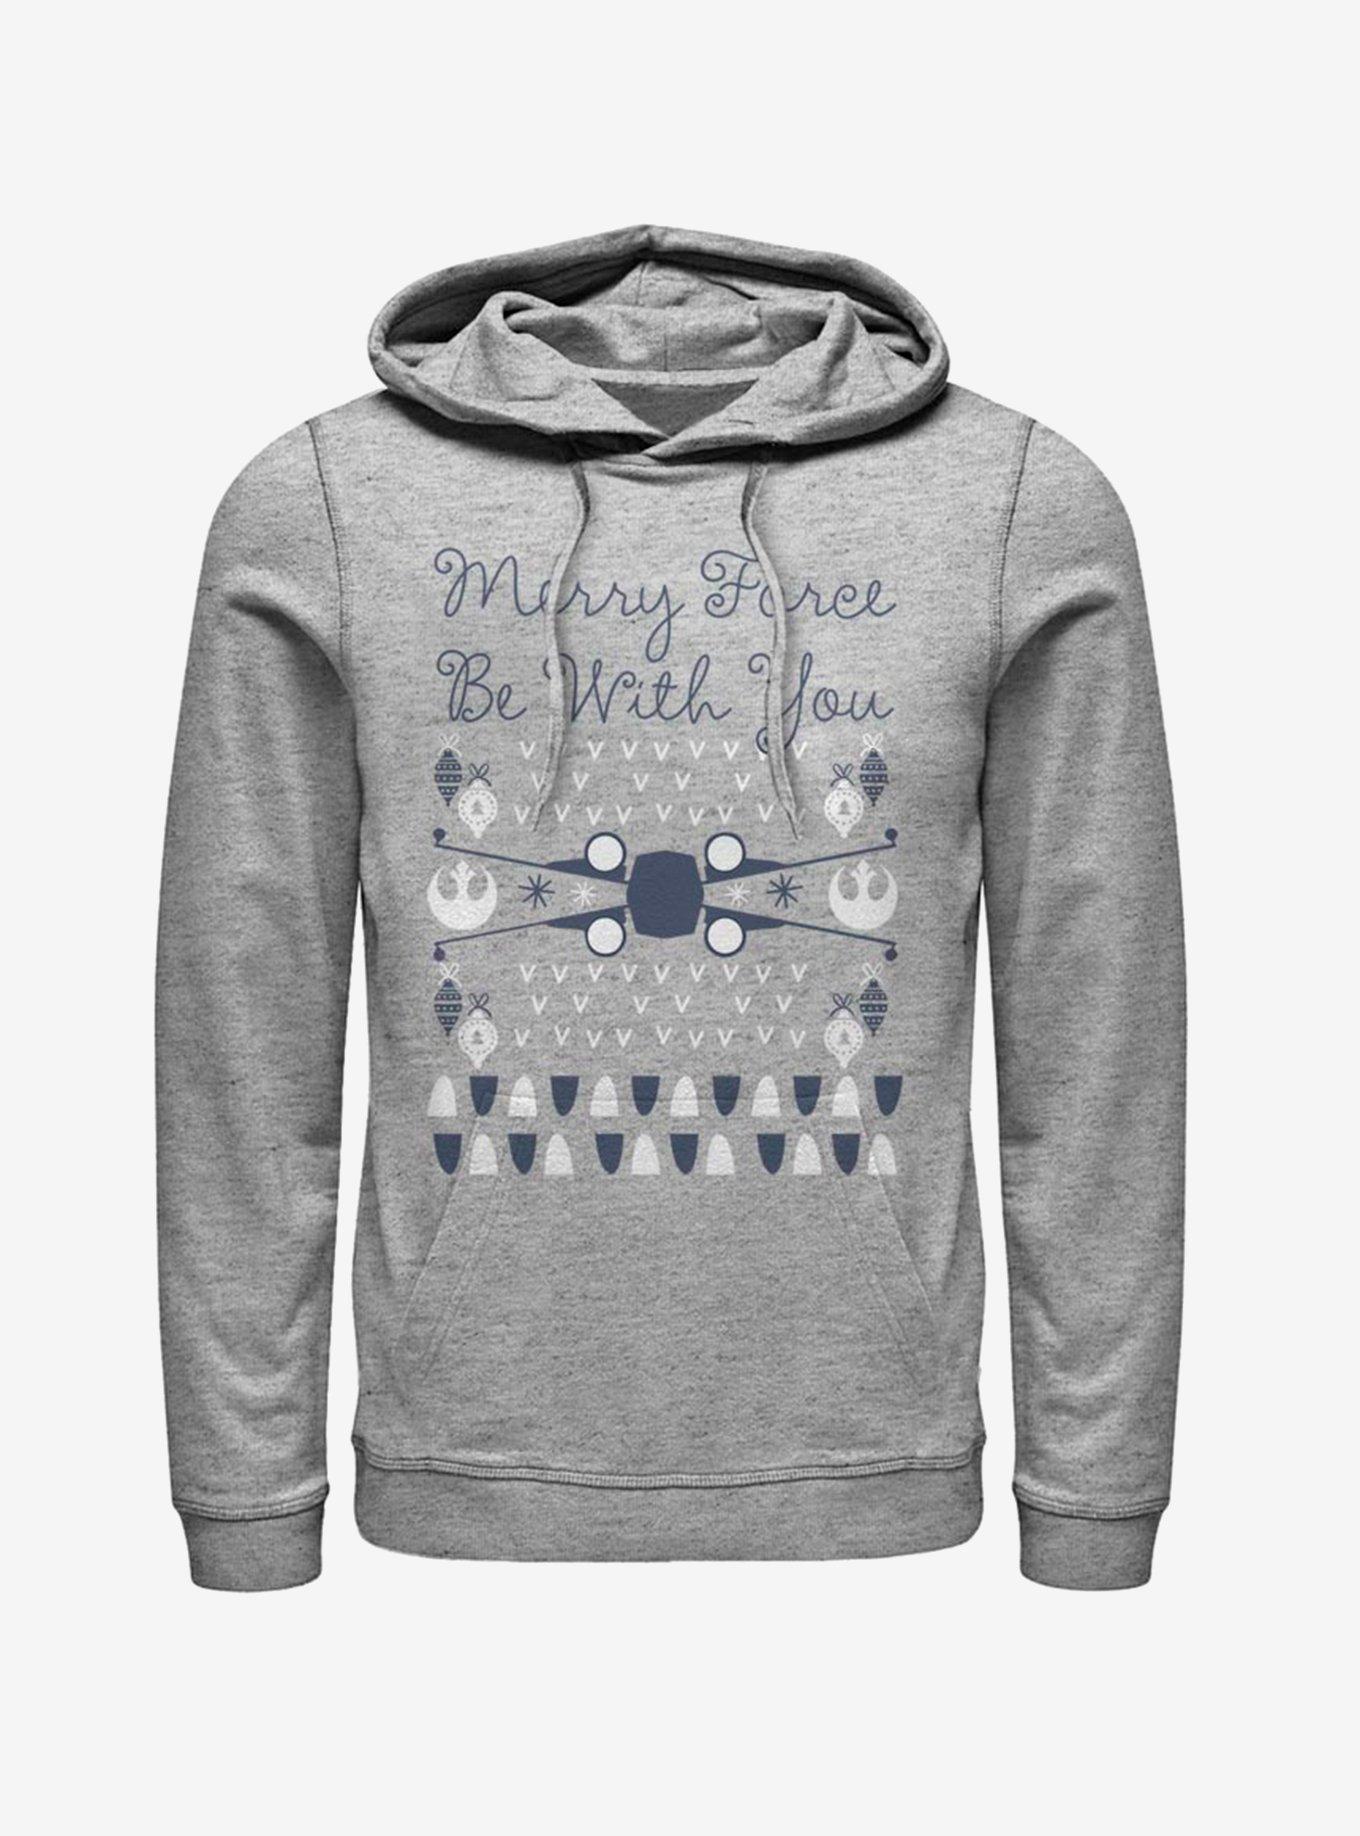 Star Wars X-Wing Merry Force Be With You Ugly Christmas Hoodie